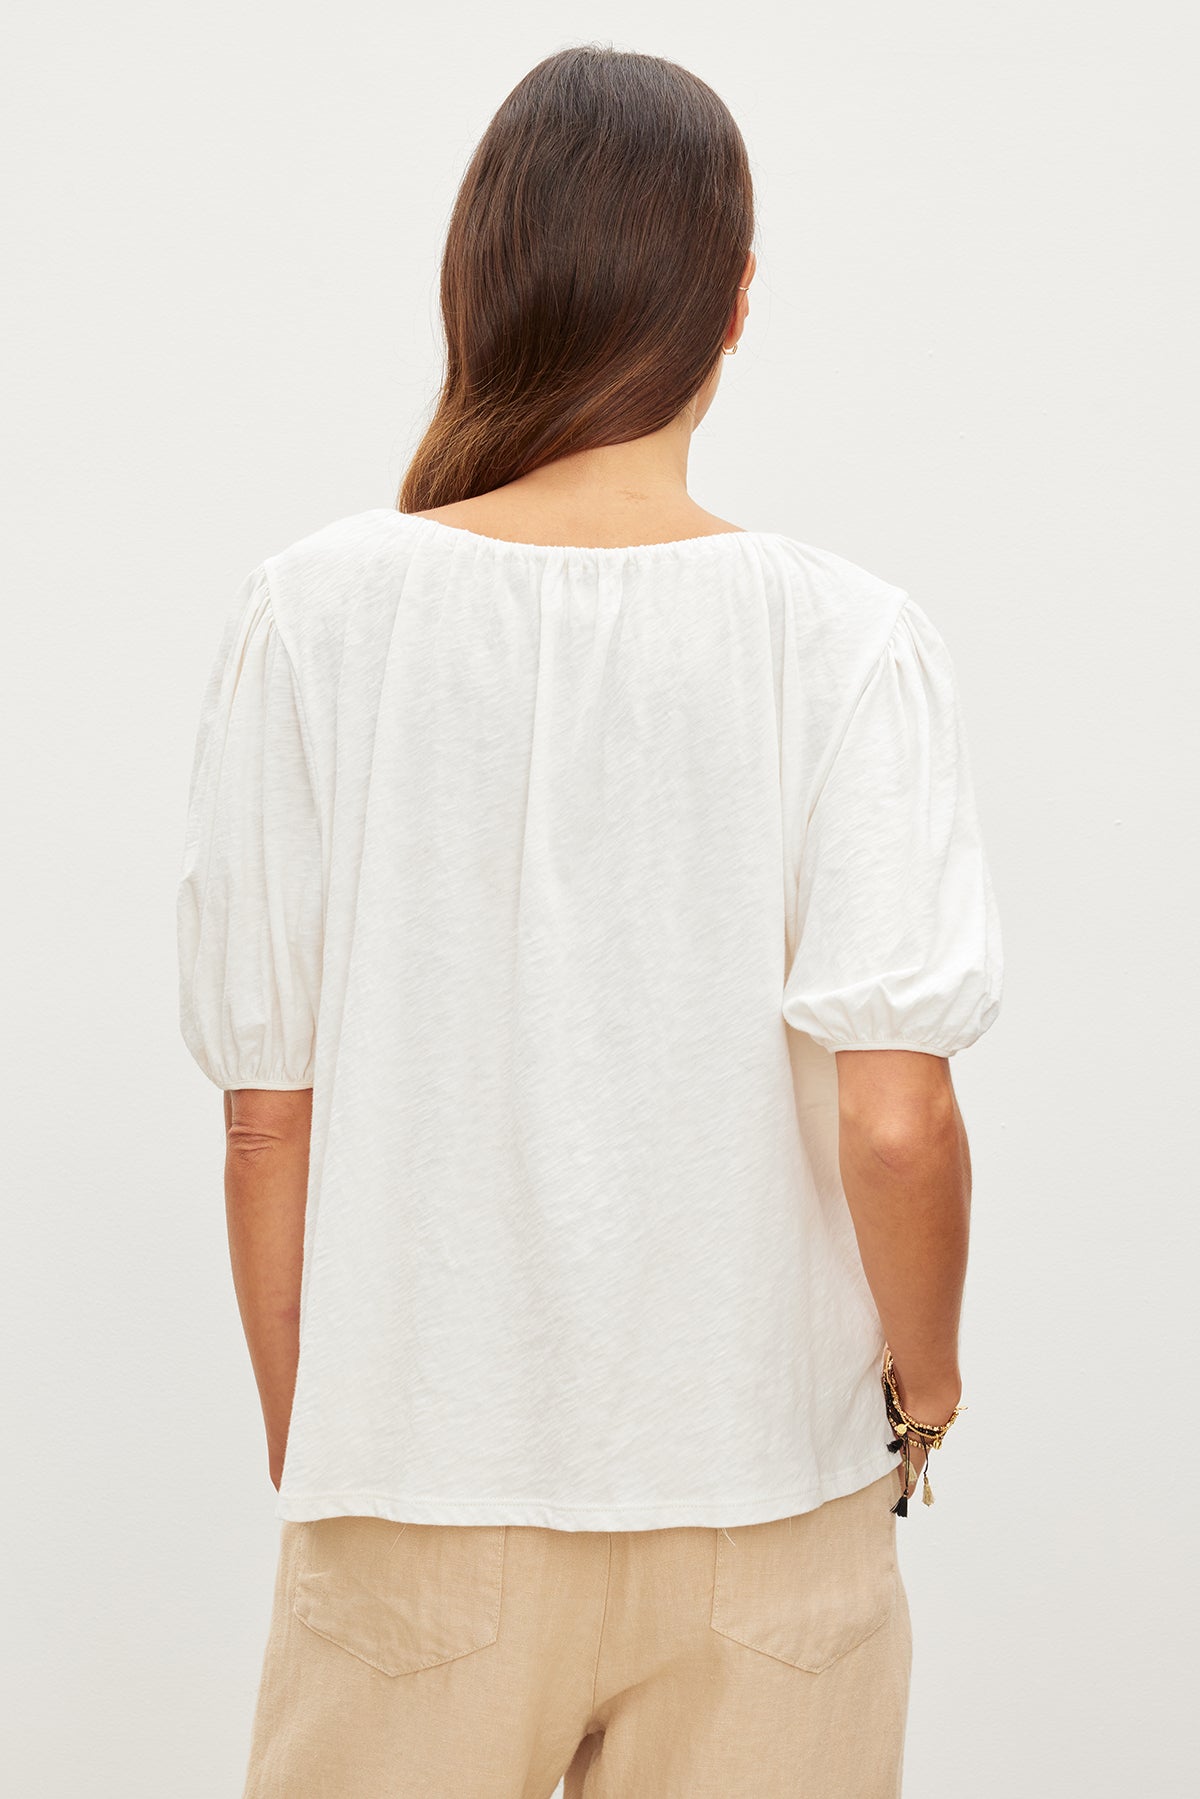 The back view of a woman wearing a white LEE RELAXED TEE by Velvet by Graham & Spencer and tan pants.-35967725109441